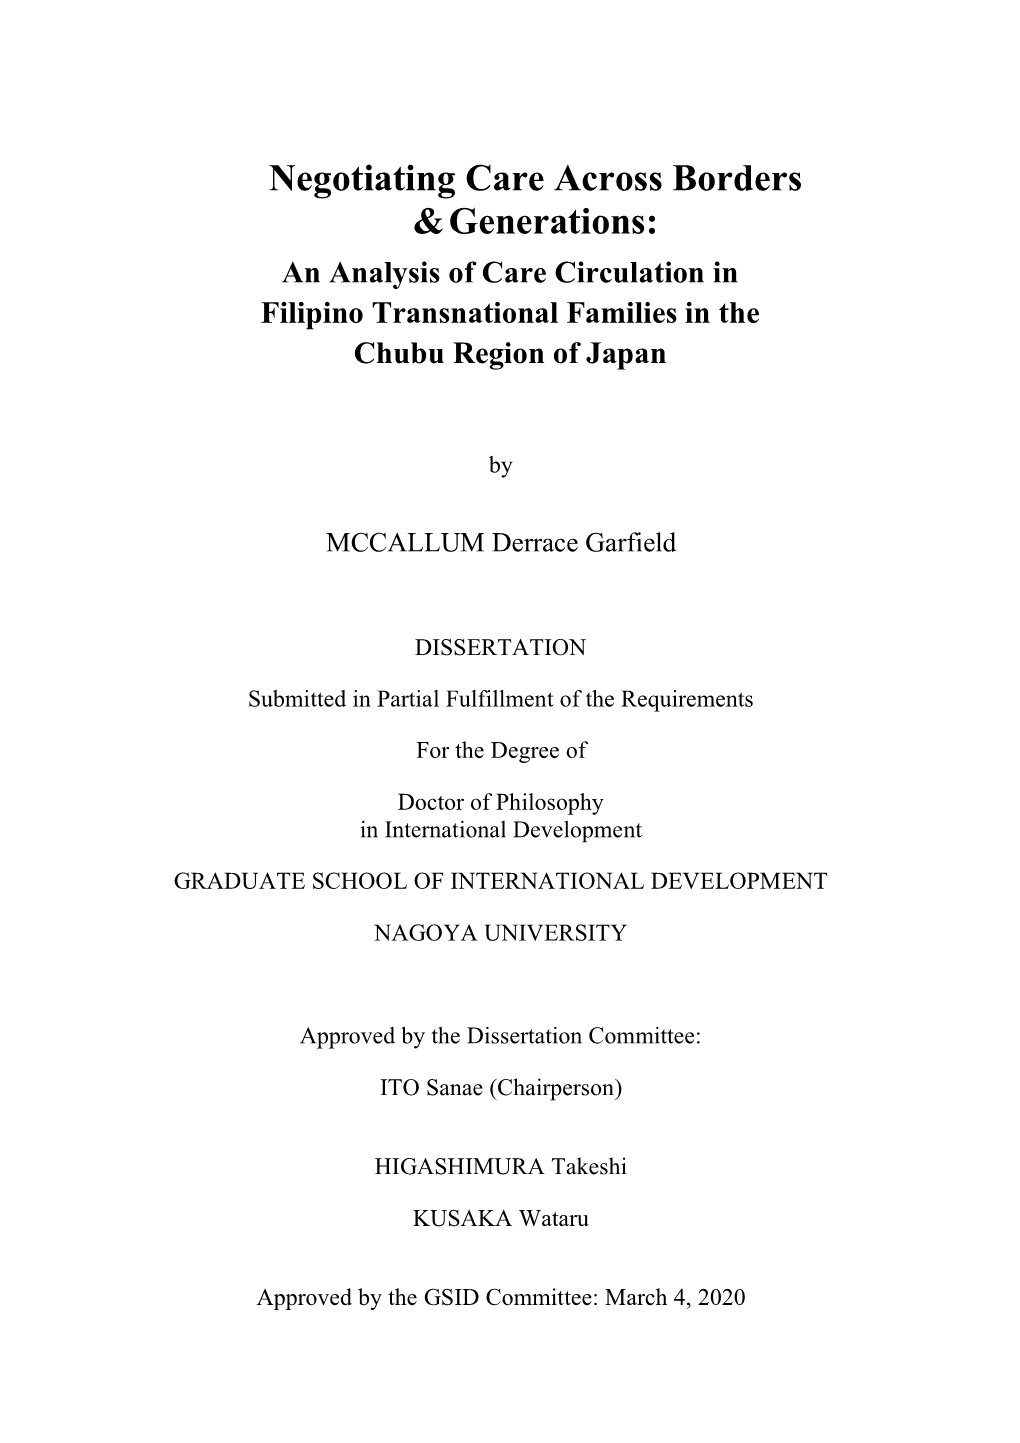 Negotiating Care Across Borders &Generations: an Analysis of Care